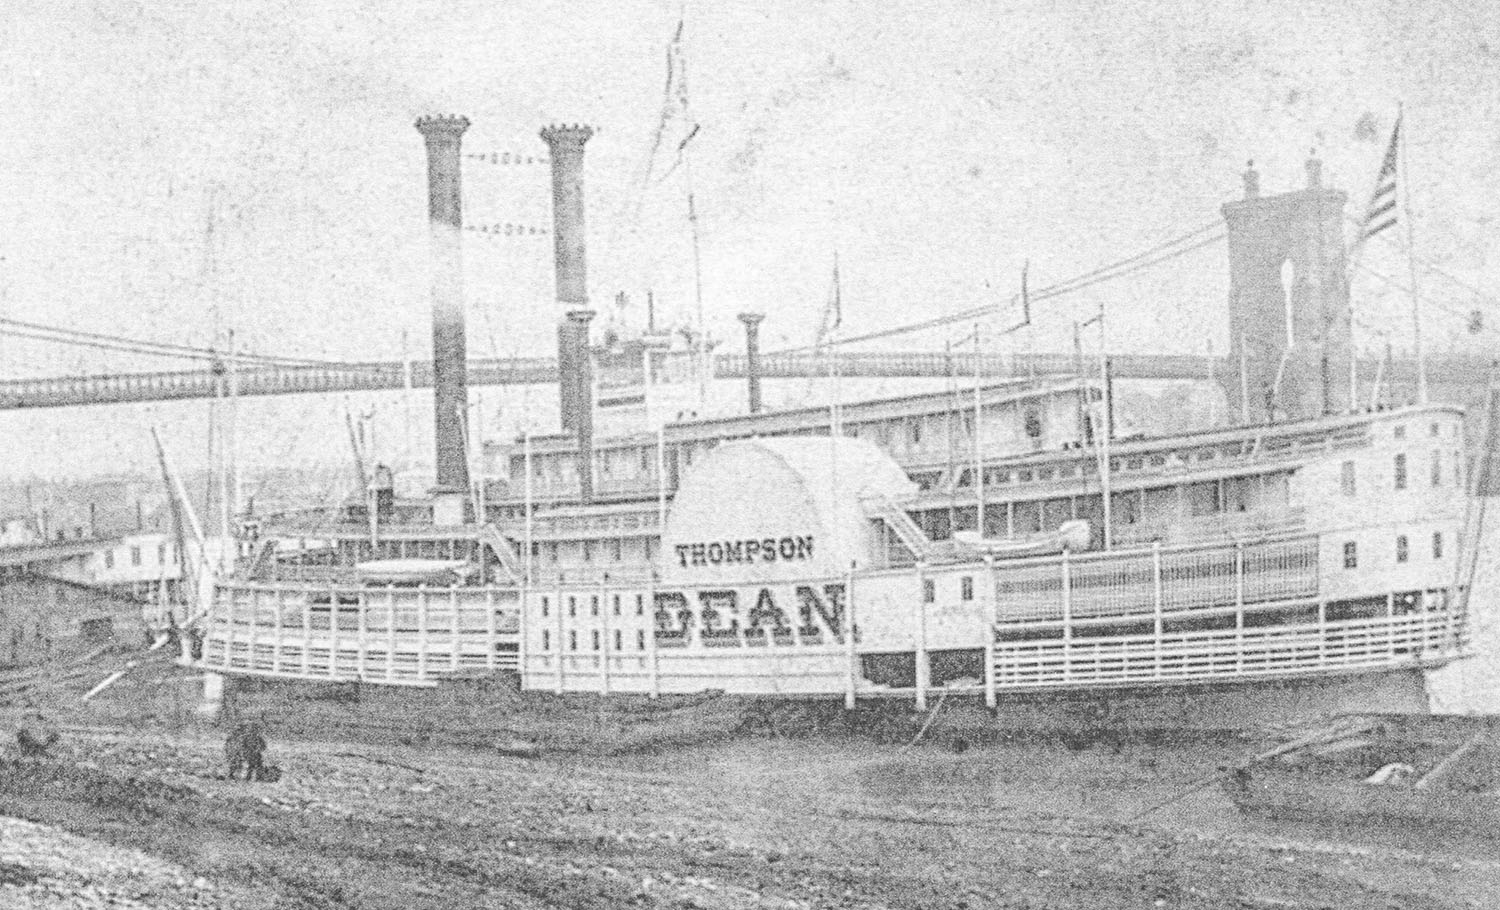 The big sidewheeler Thompson Dean at the Cincinnati waterfront. (Keith Norrington collection)